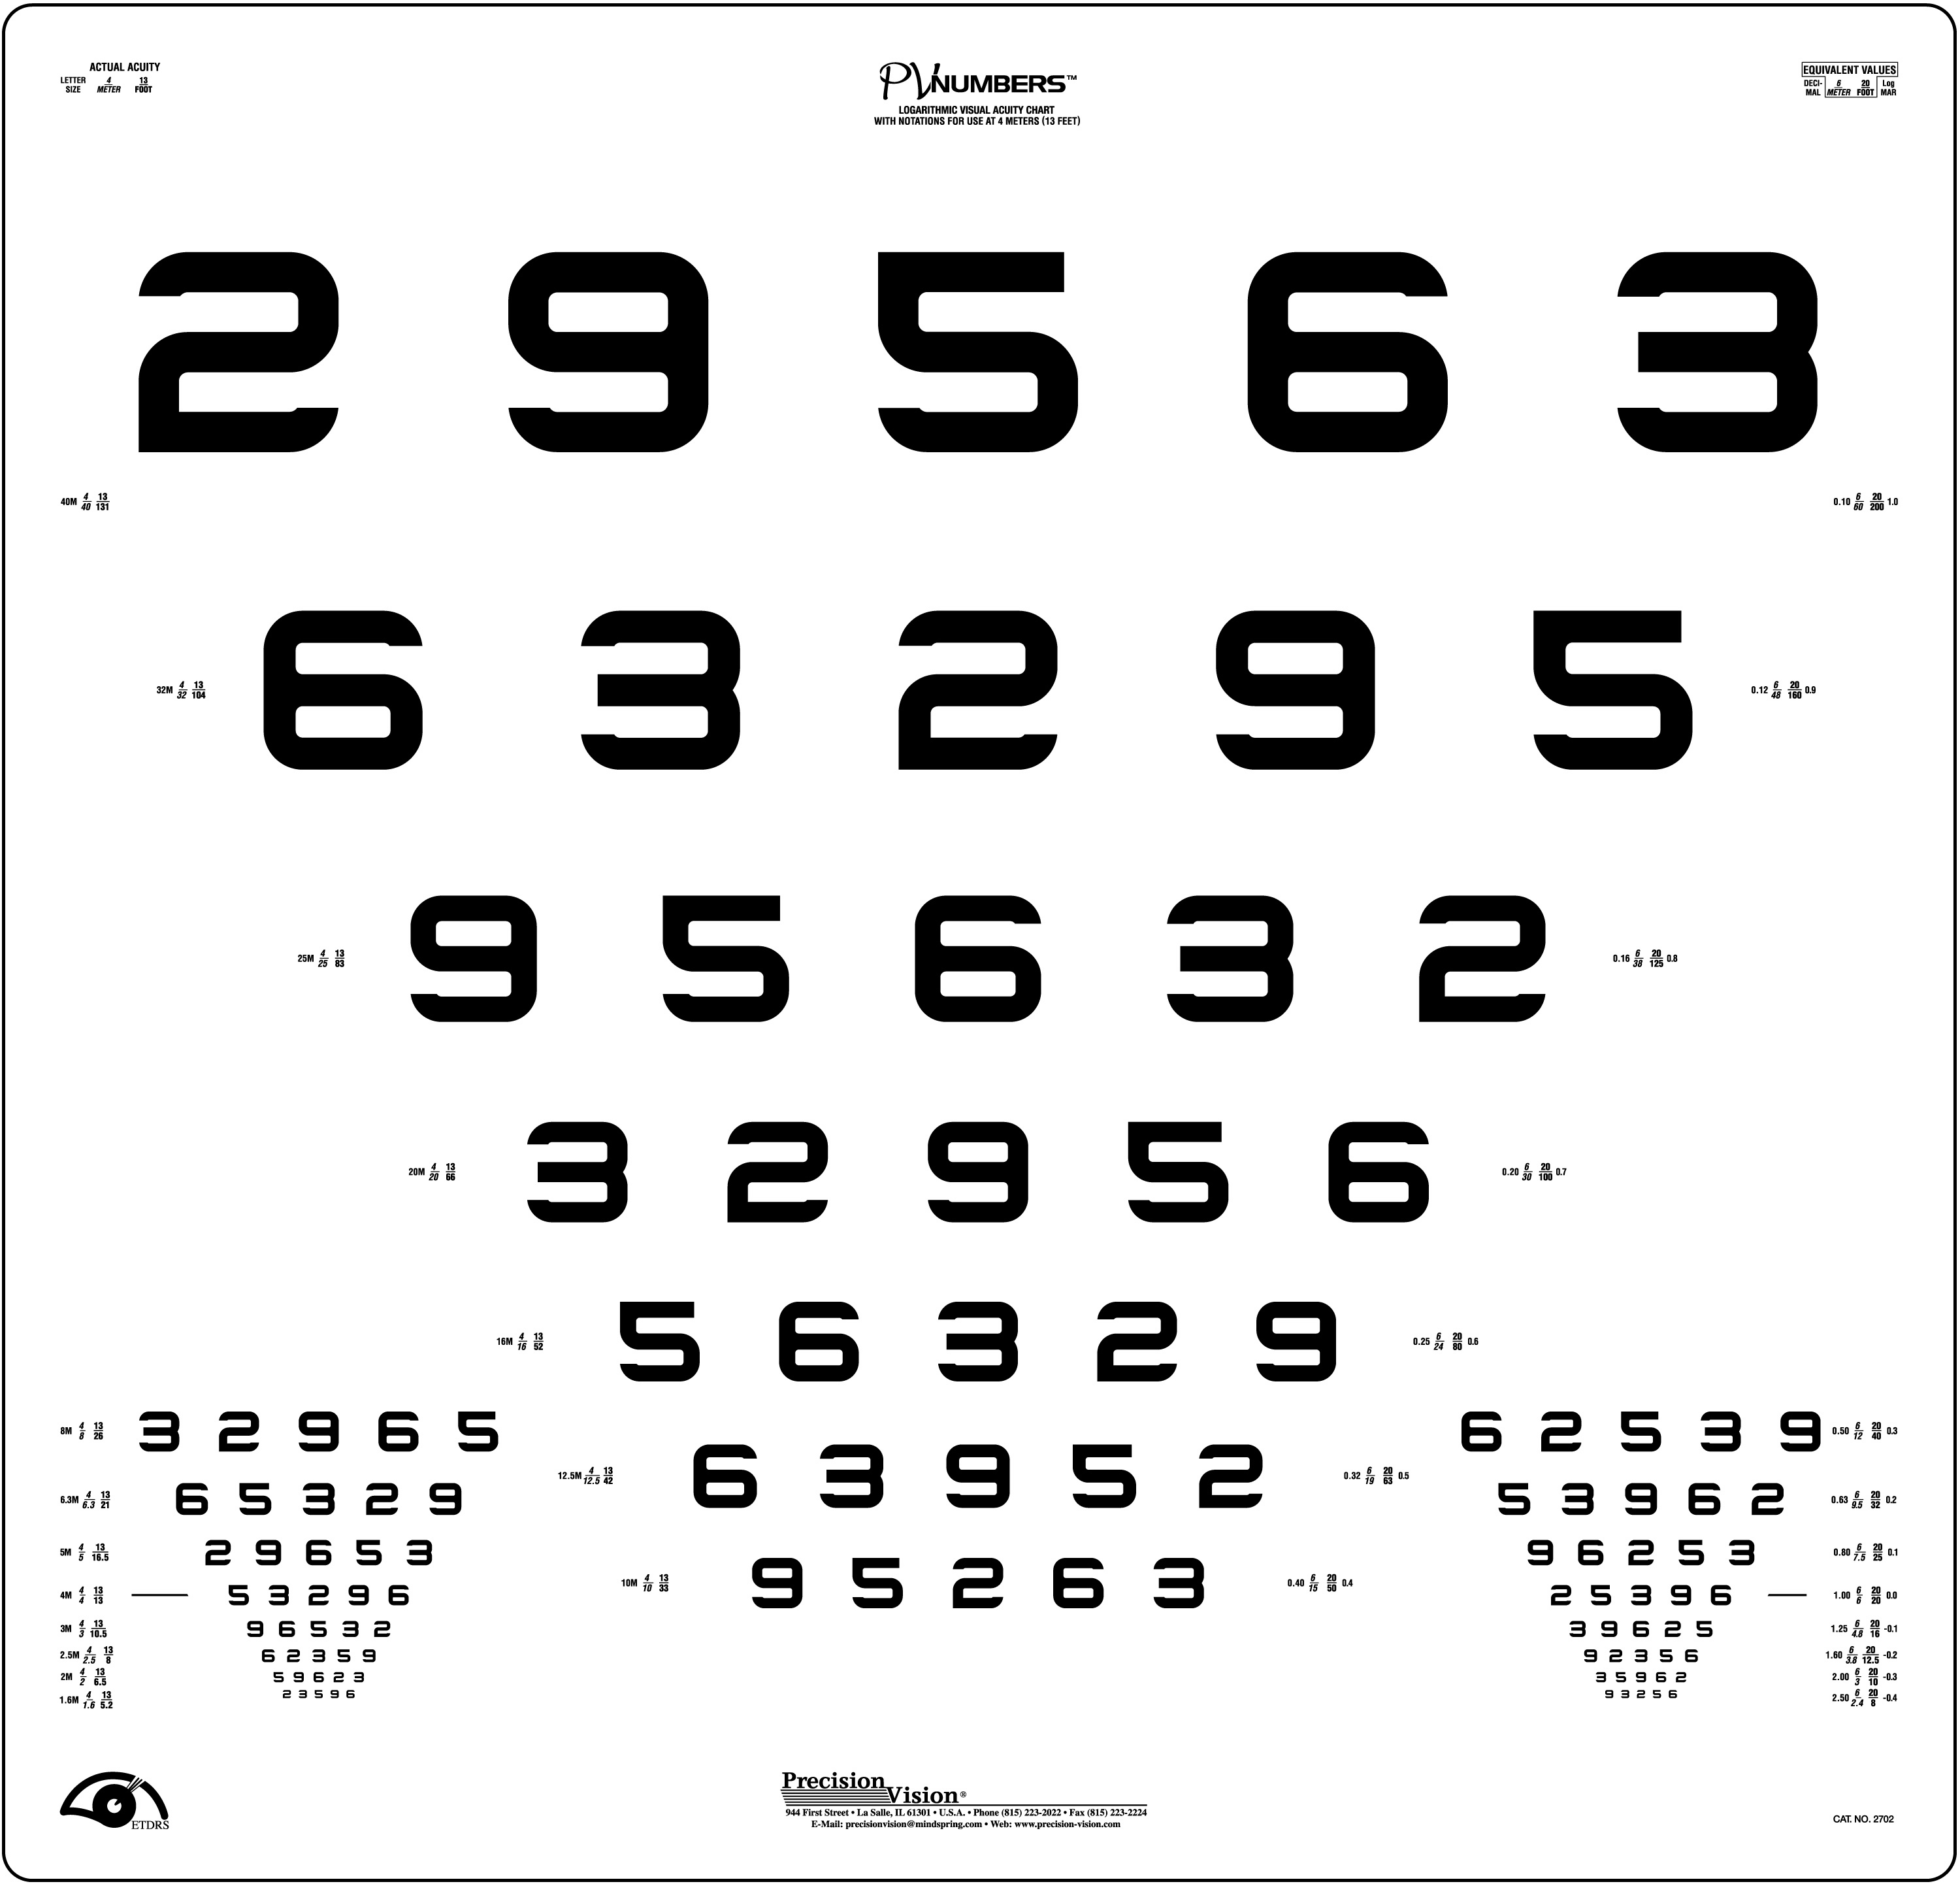 PV Numbers Acuity Chart for 4 Meters - Precision Vision